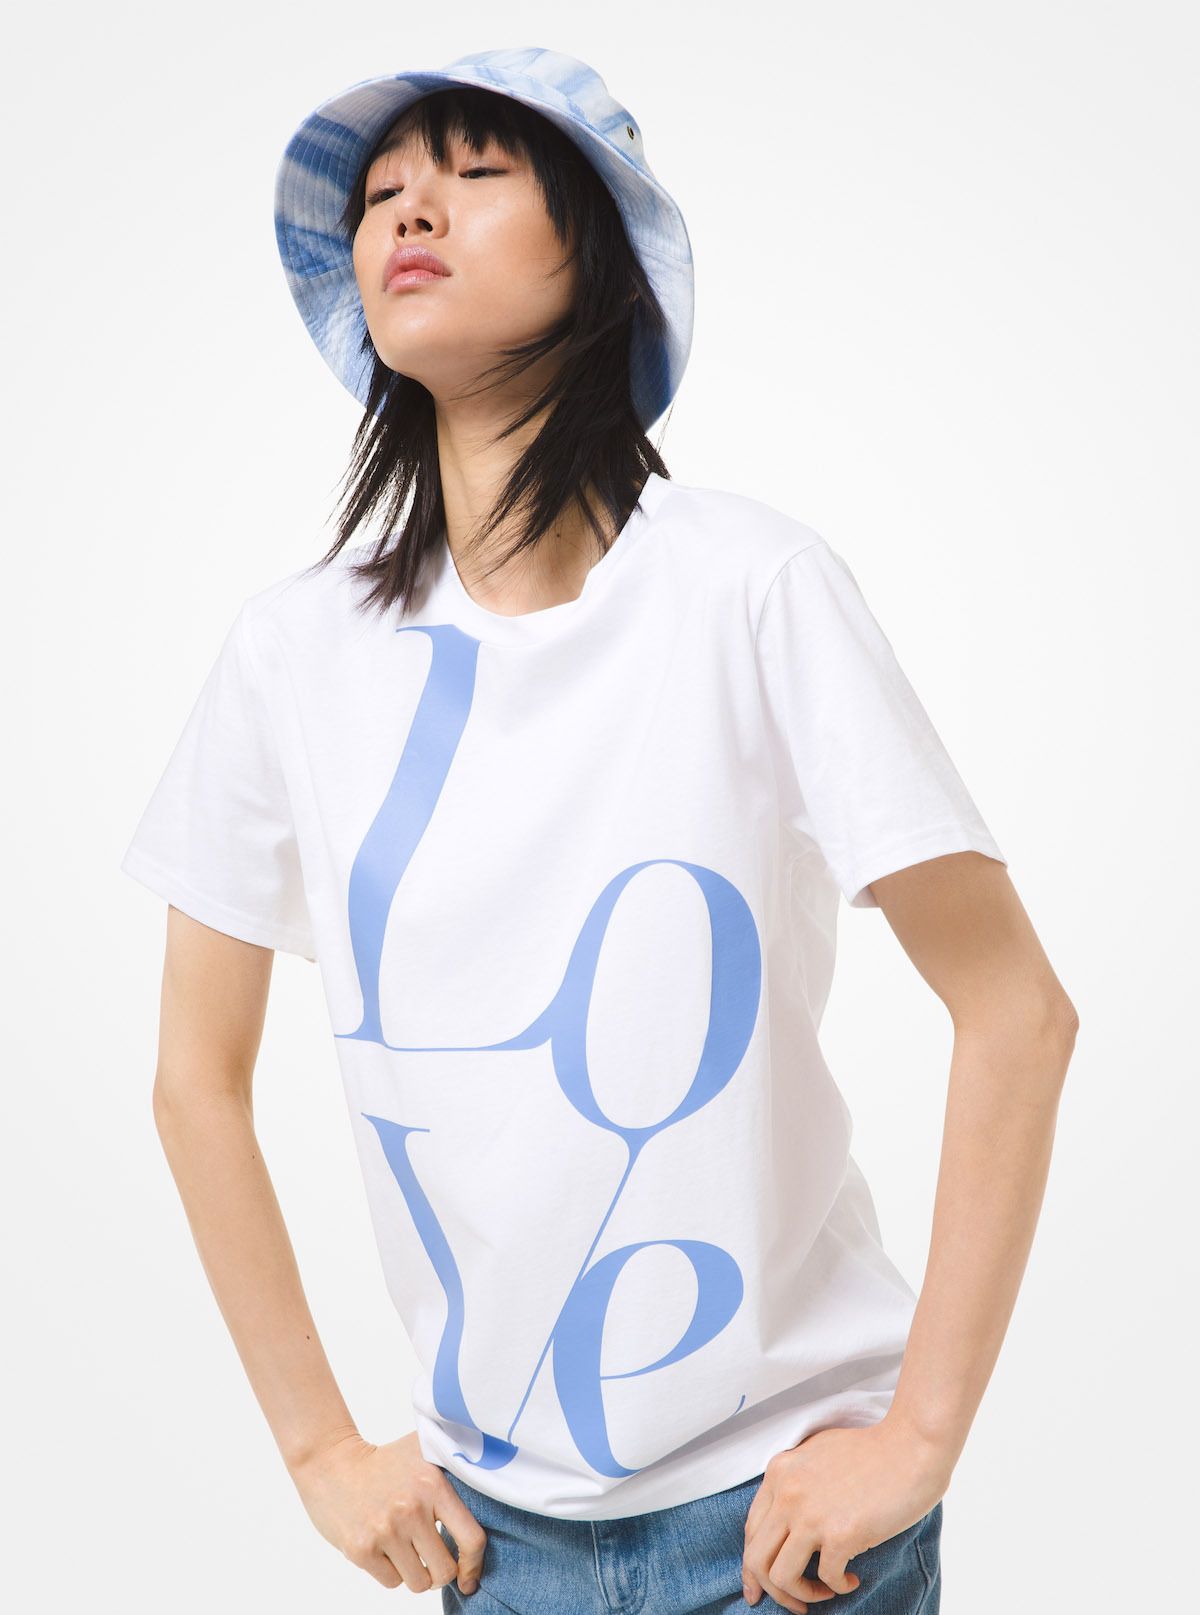 Michael Kors #WatchHungerStop Love T-Shirt for COVID-19